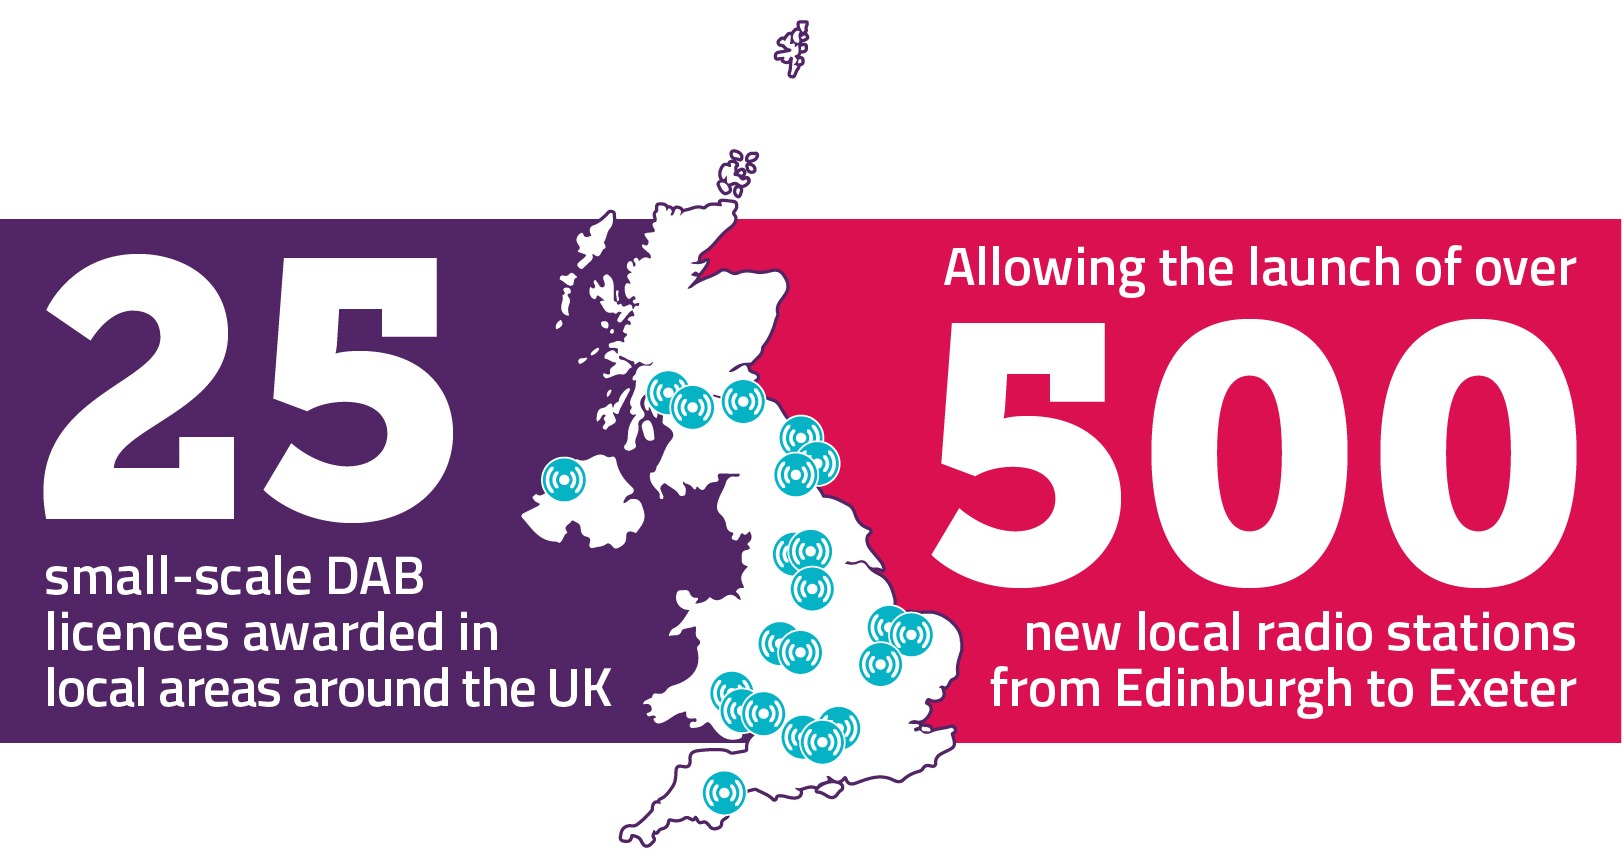 25 small-scale DAB licences will allow 500 new local radio stations to launch.